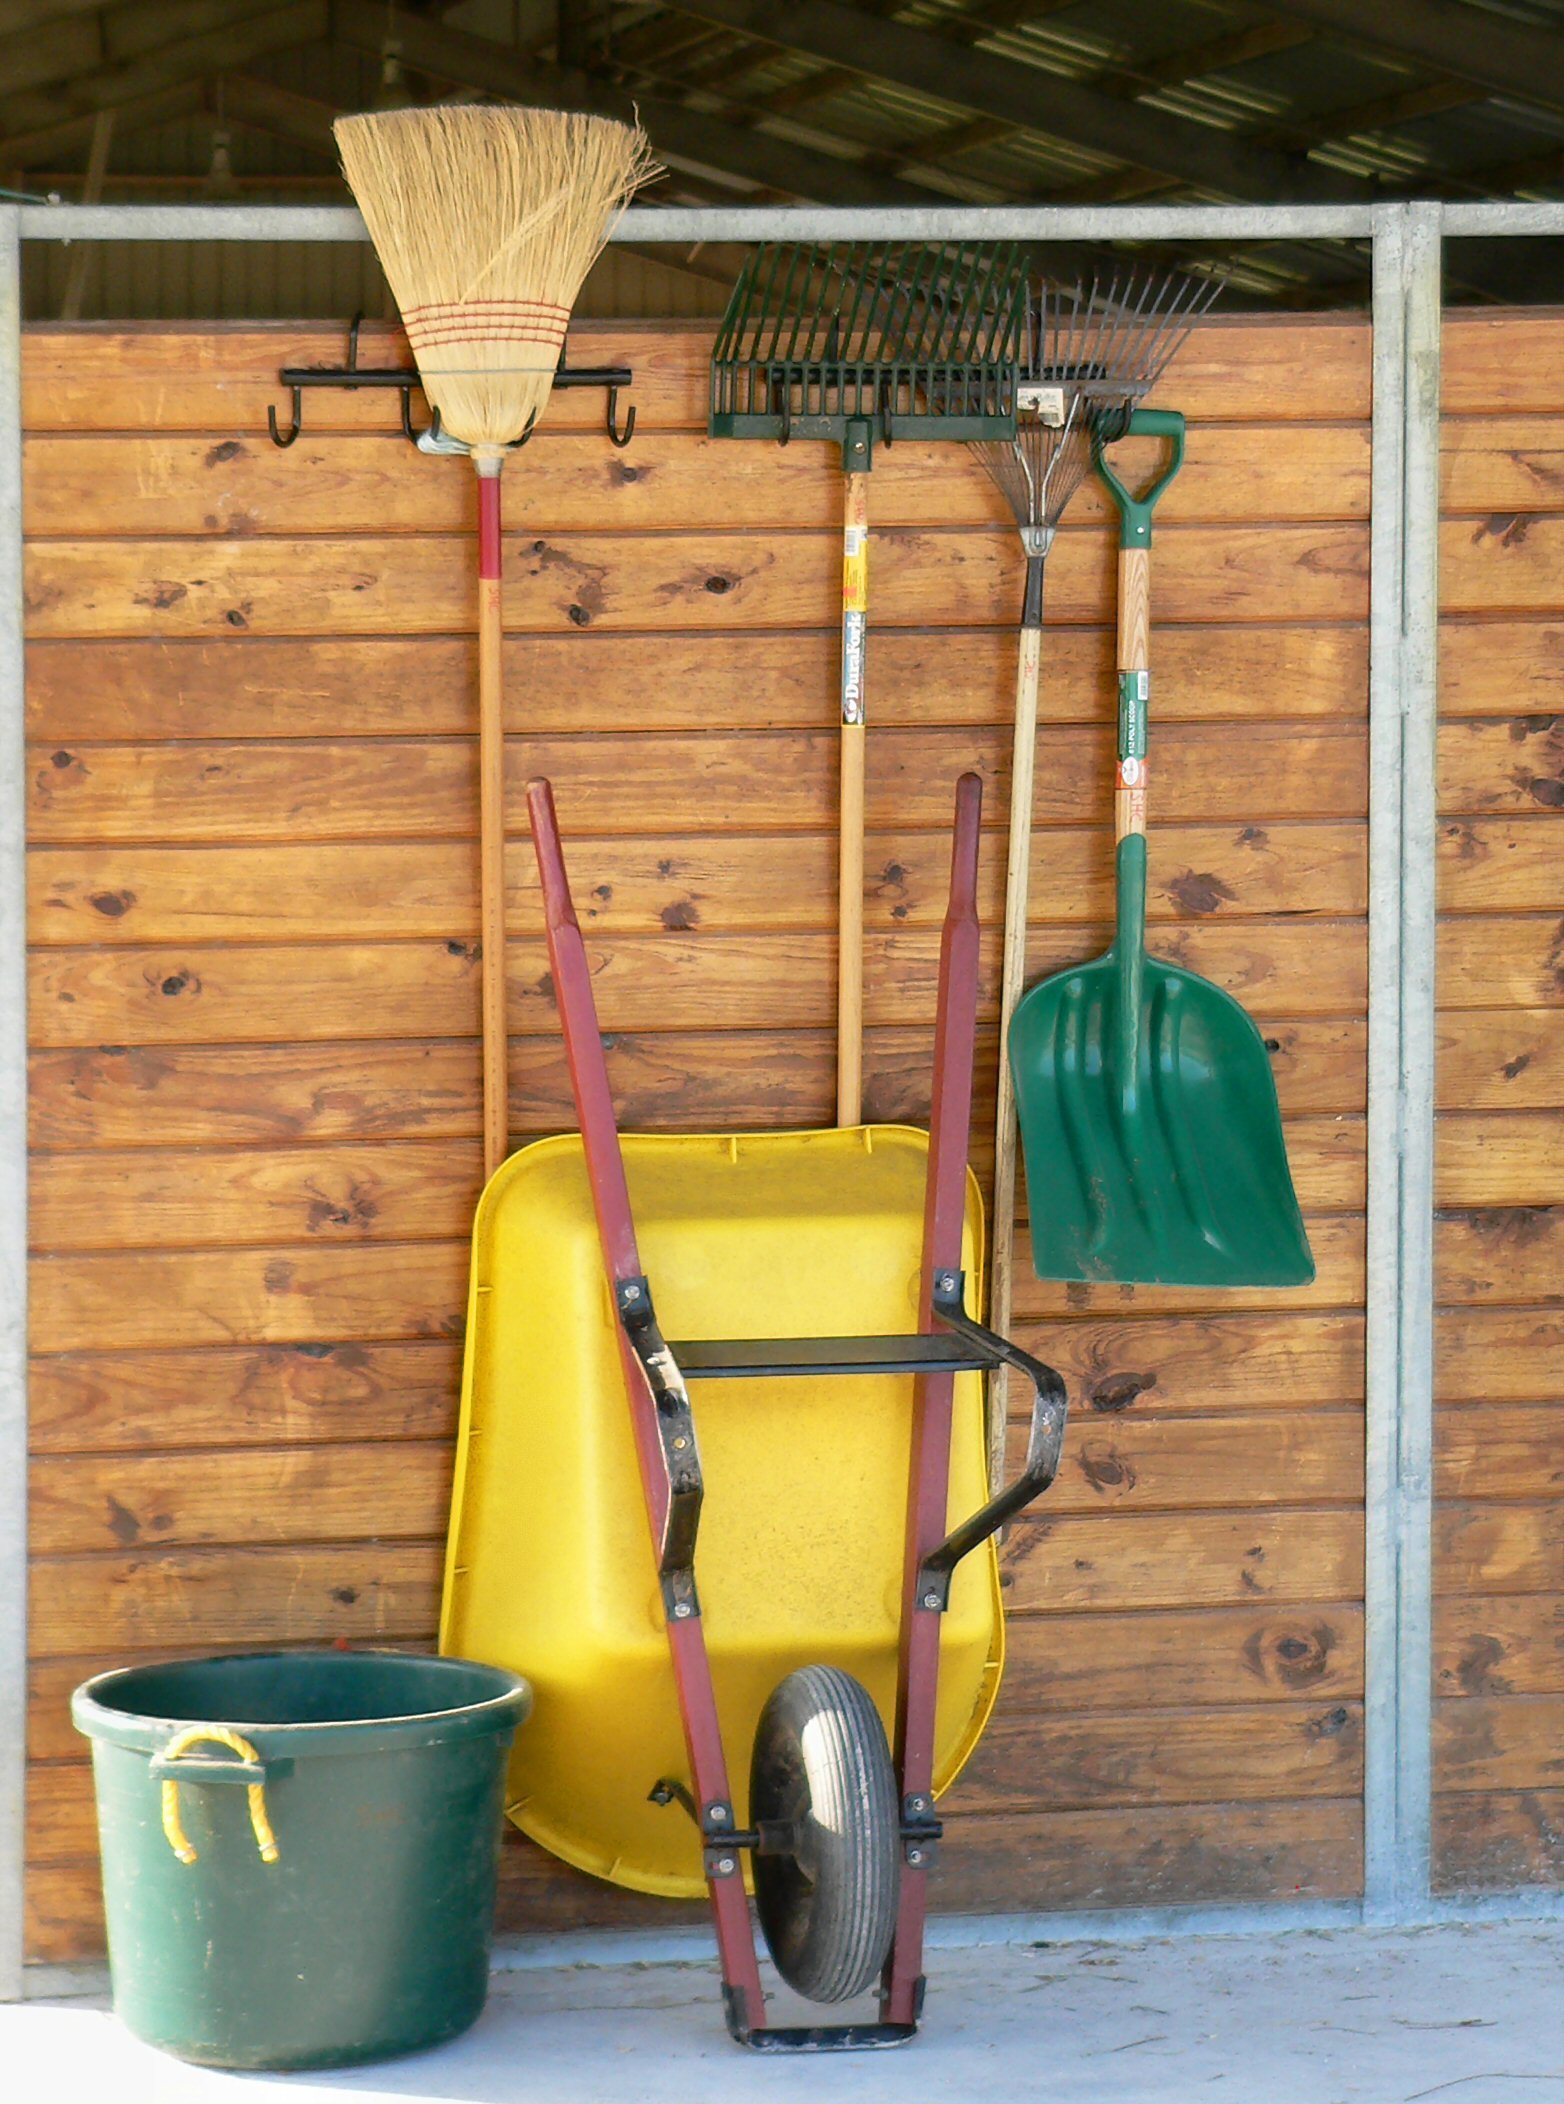 Wheelbarrow, shovel, and various tools are propped up against a wood wall.